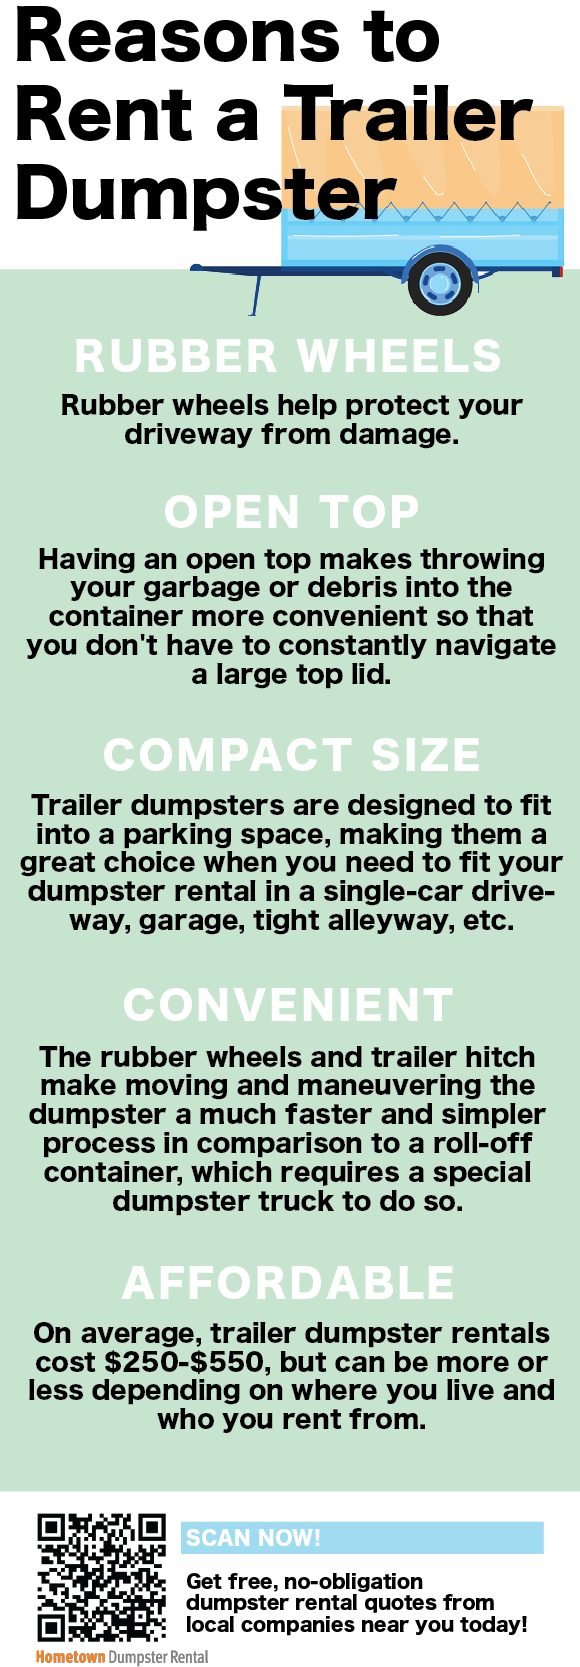 Reasons to Rent a Trailer Dumpster Infographic